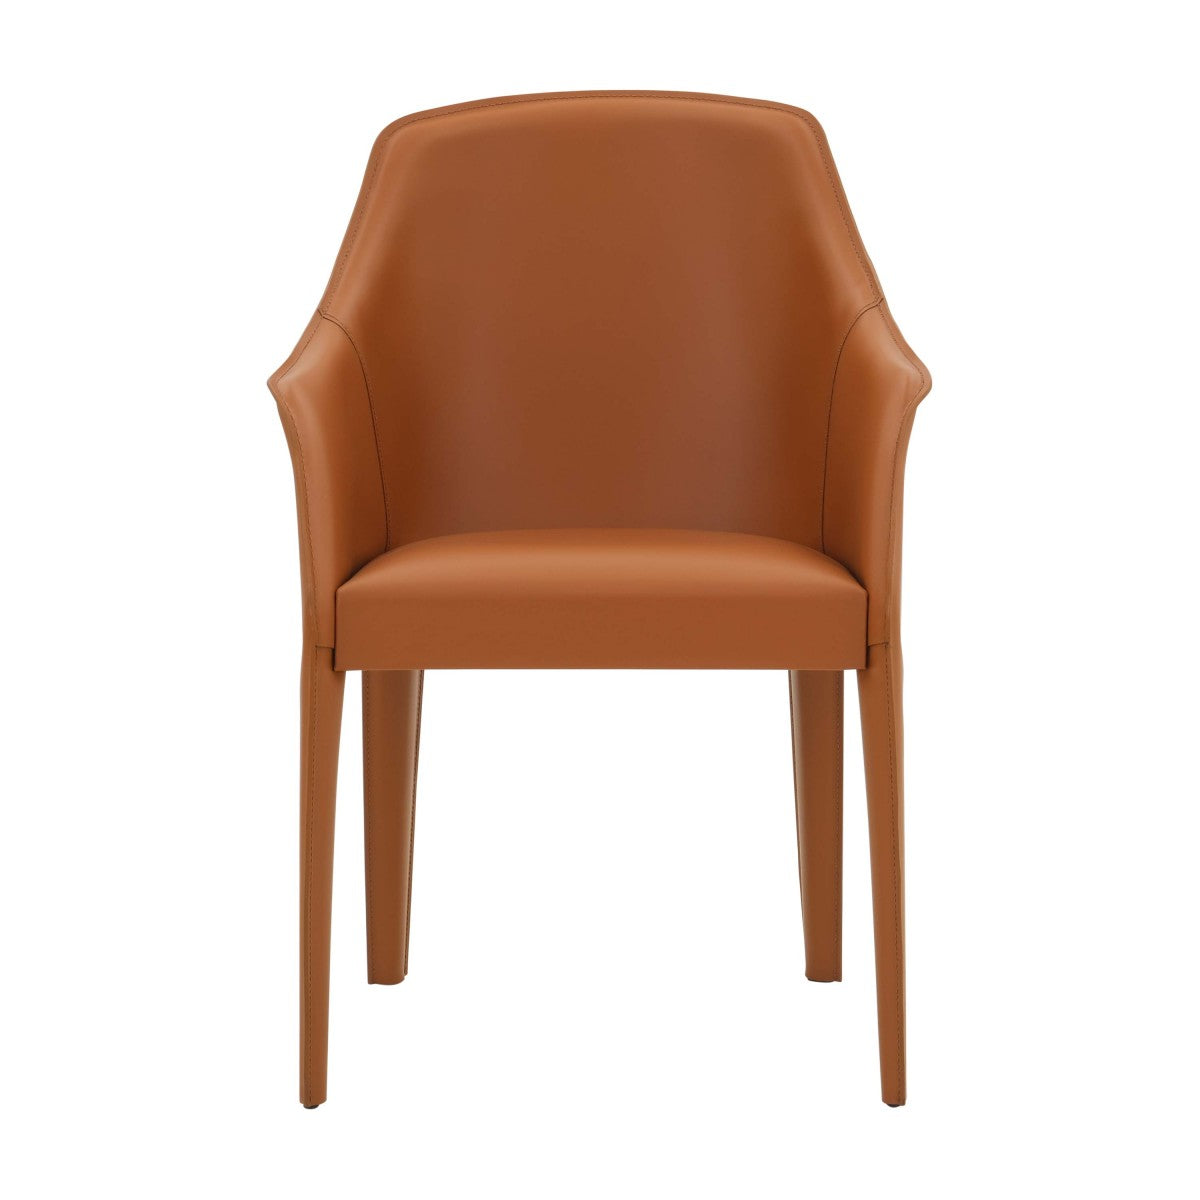 Berica Bespoke Upholstered Modern Contemporary Dining Armchair Chair MS024A Custom Made To Order